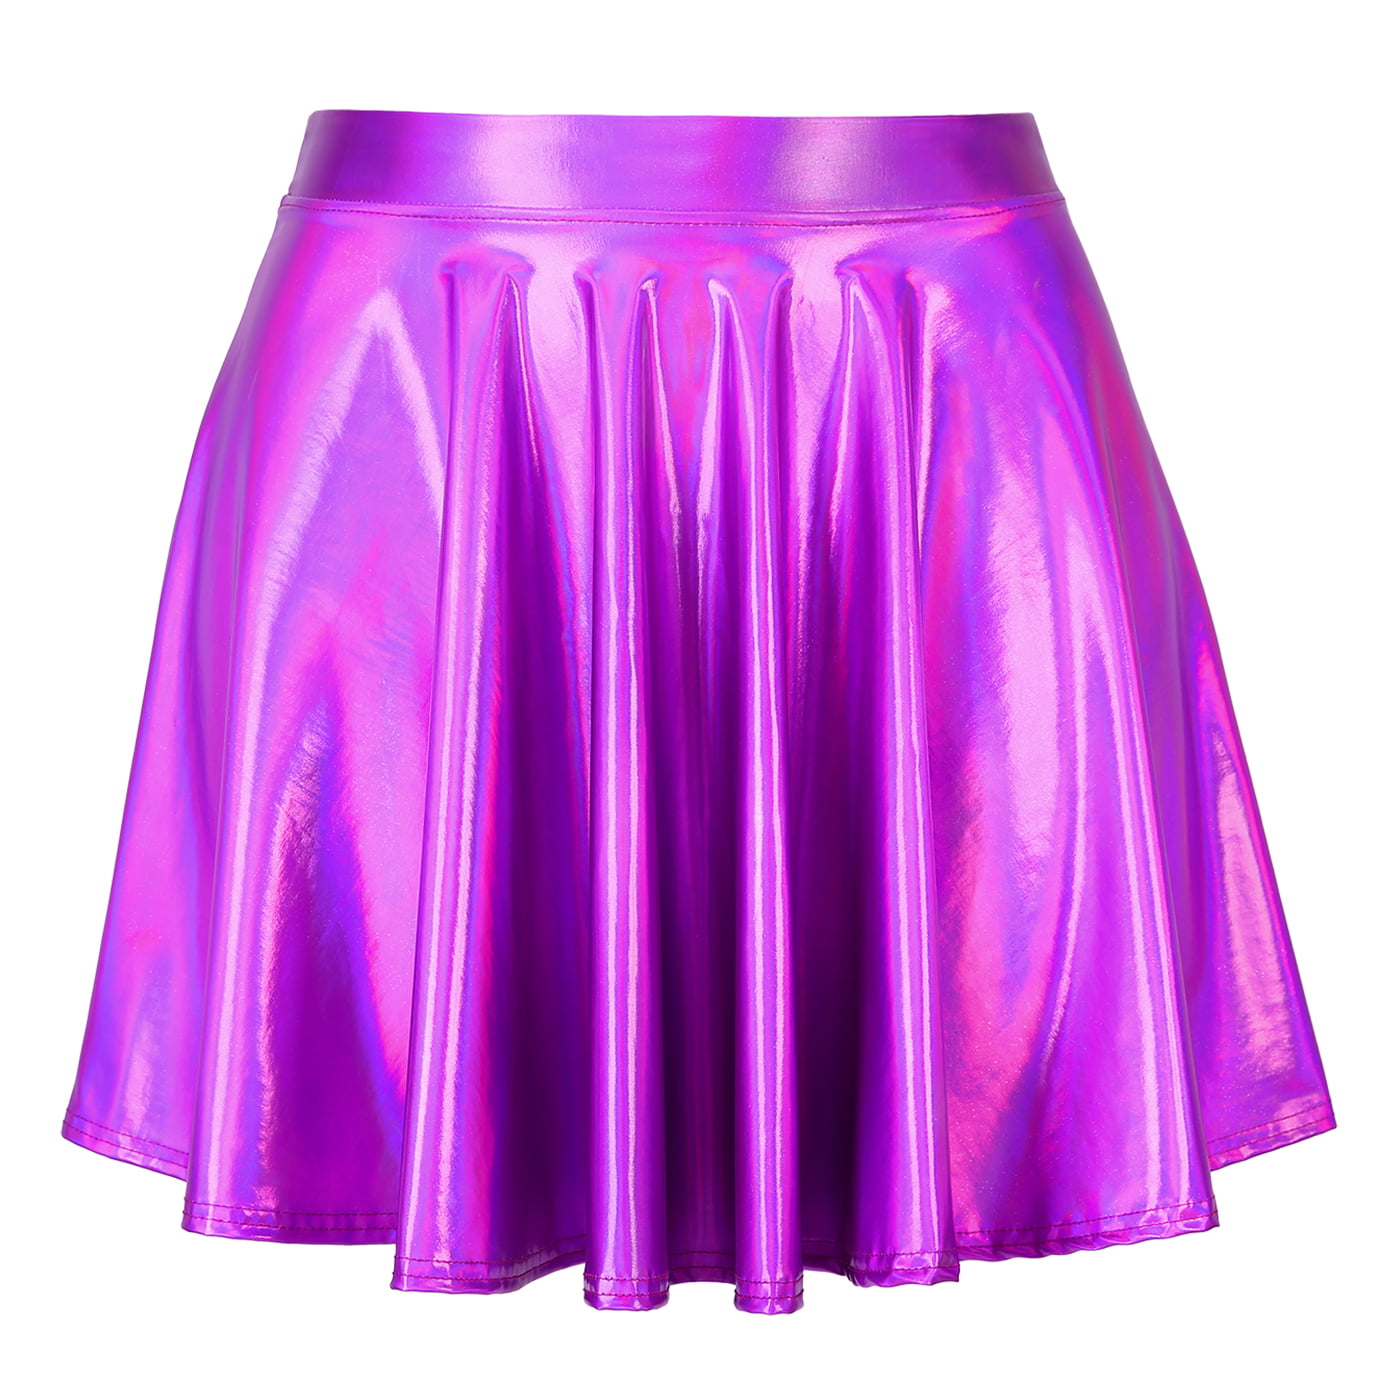 Shiny Vibrant Colorful Holographic Skirts 5 colors!